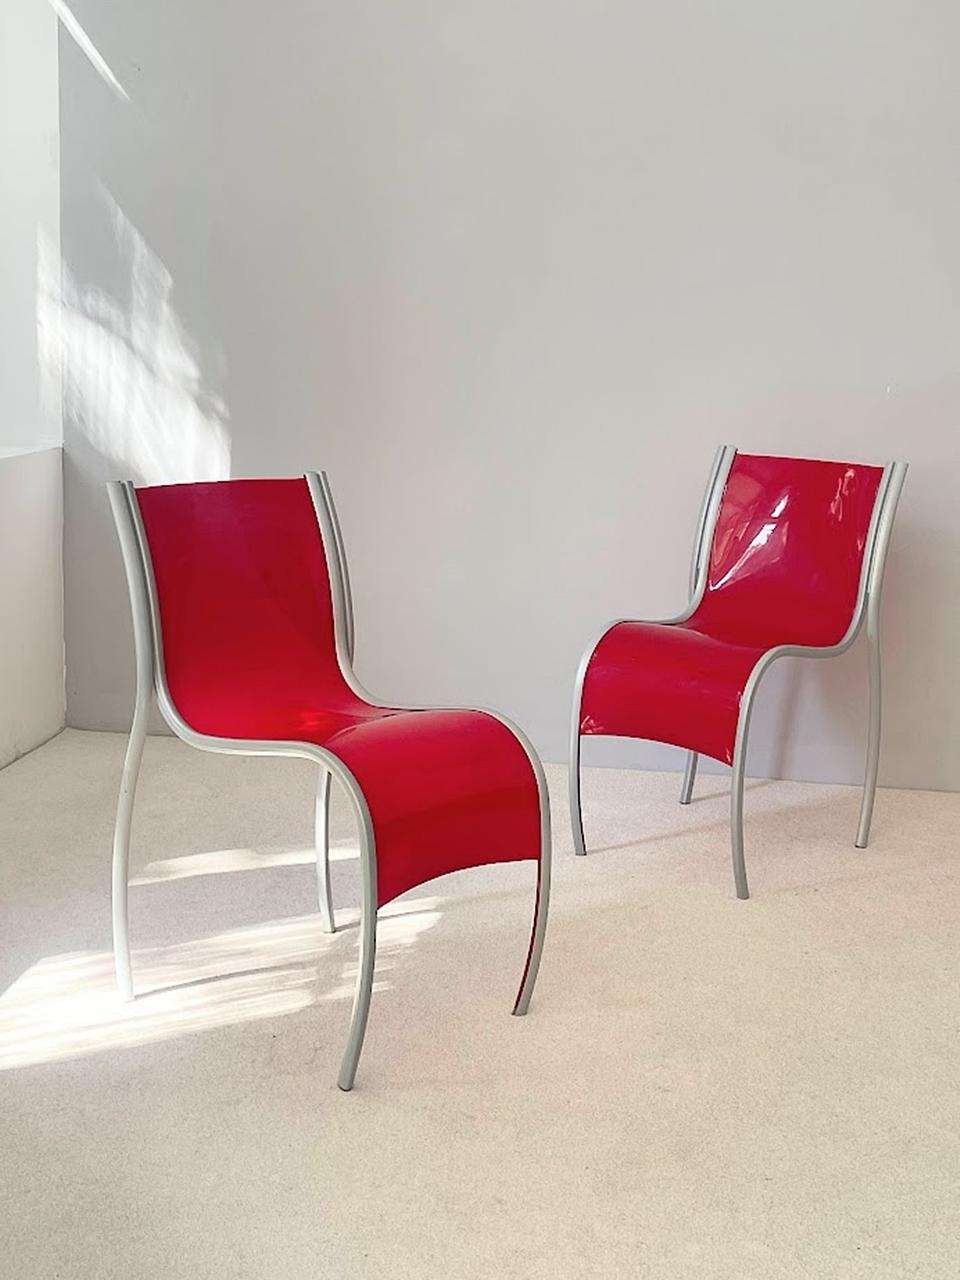 Modern set of 2 red plastic vintage chairs or dining chairs from red plastic and aluminum FPE Fantastic Plastic Elastic by Ron Arad for Kartell Italy 1999. Red curved plastic seat shell with aluminum frame features movement and dynamic.
The vintage